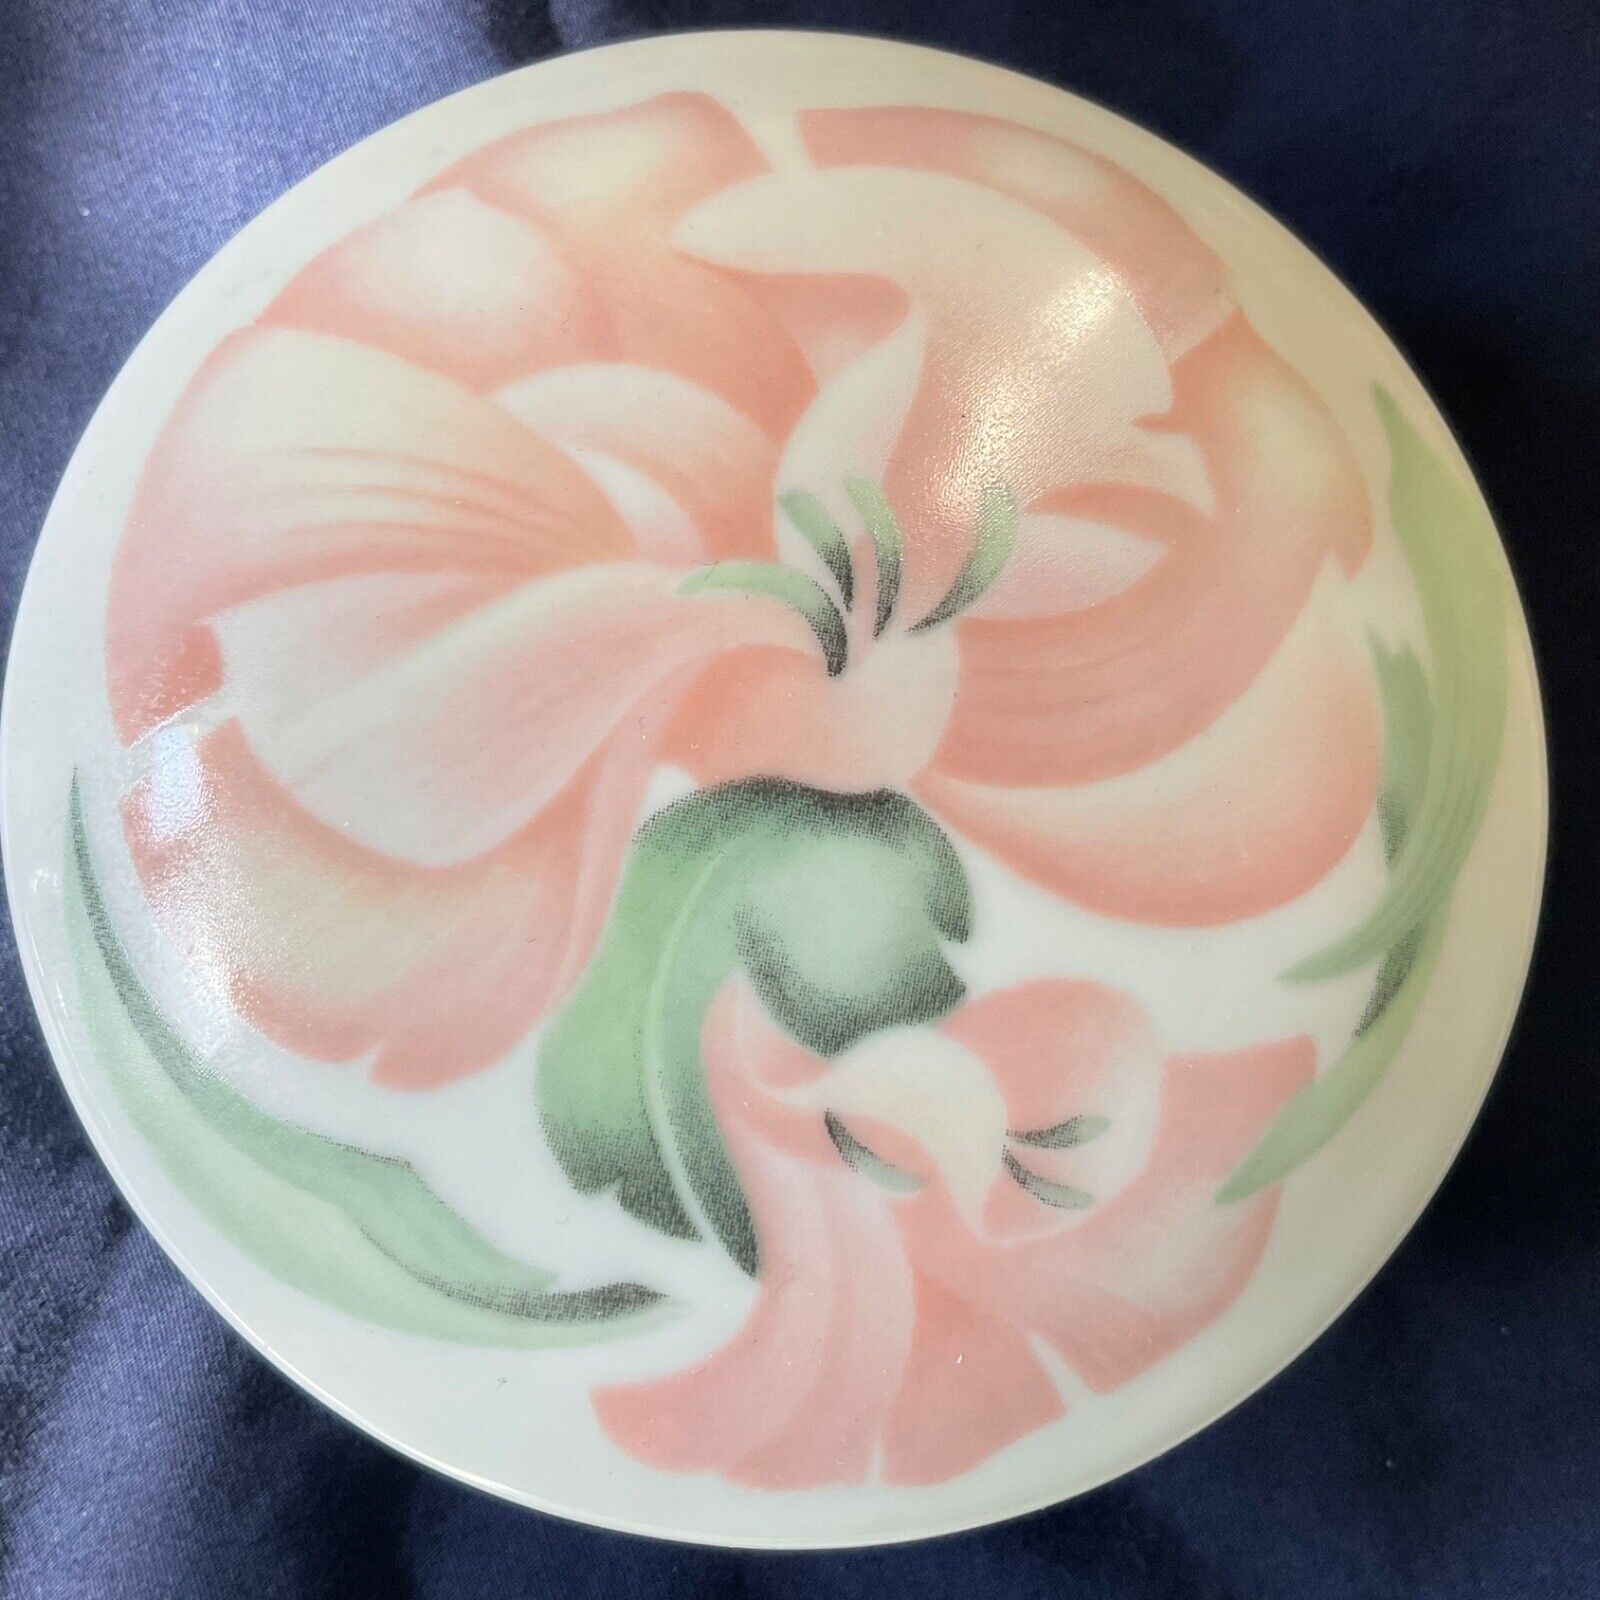 Vtg LIMOGES MNP Trinket Box France Exclusively For Anais Anais Pink Peach Floral